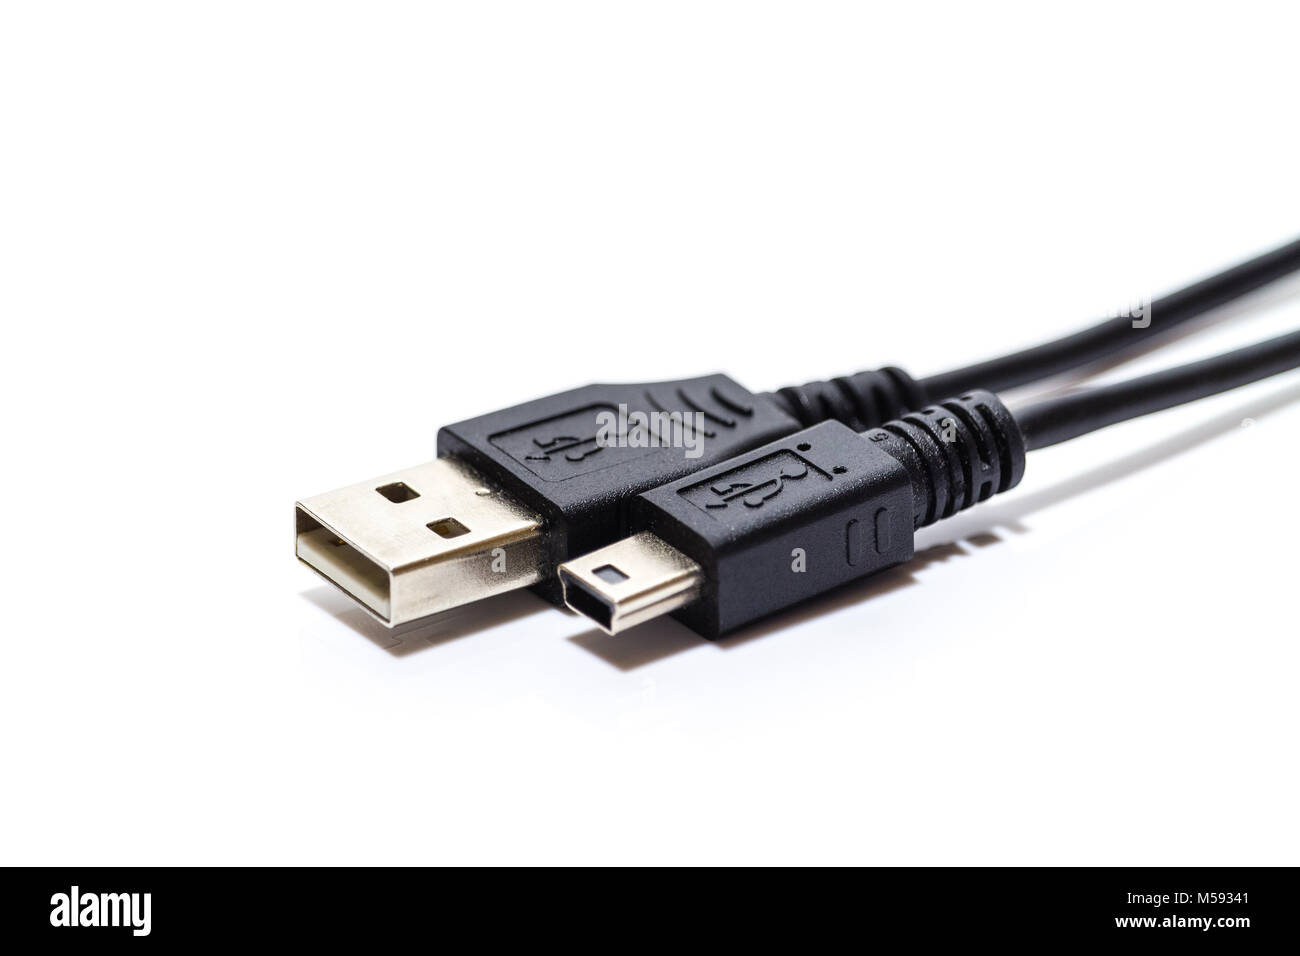 usb cable isolated on white background Stock Photo